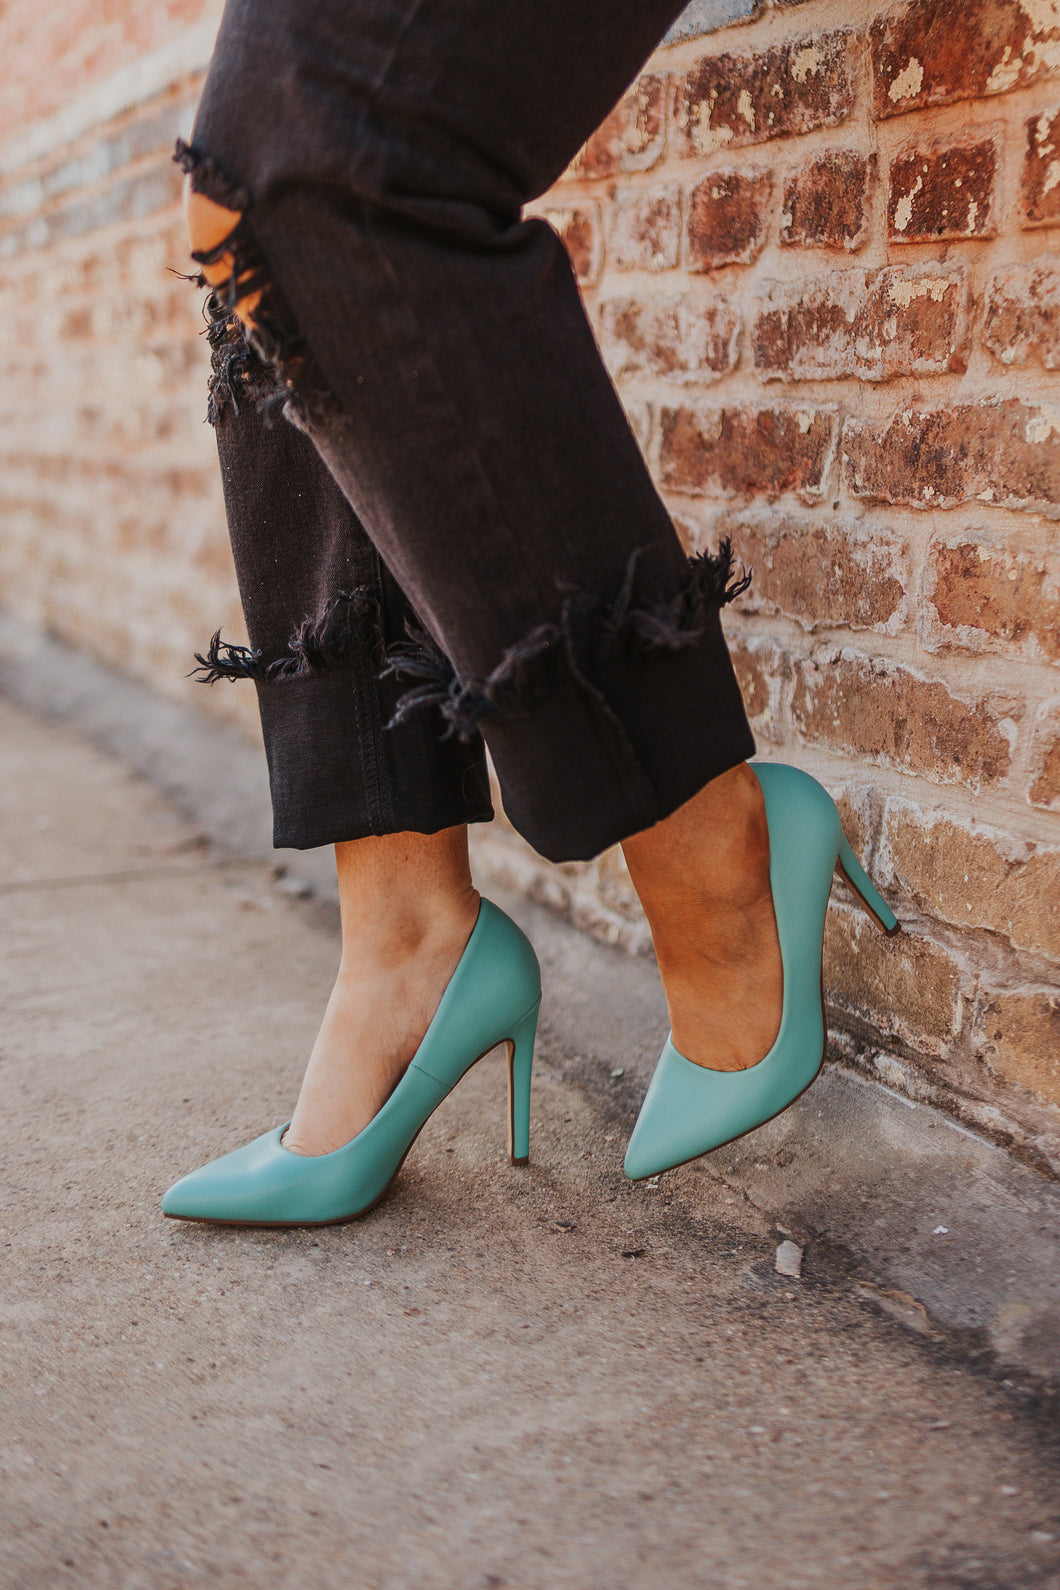 The Teal Pumps